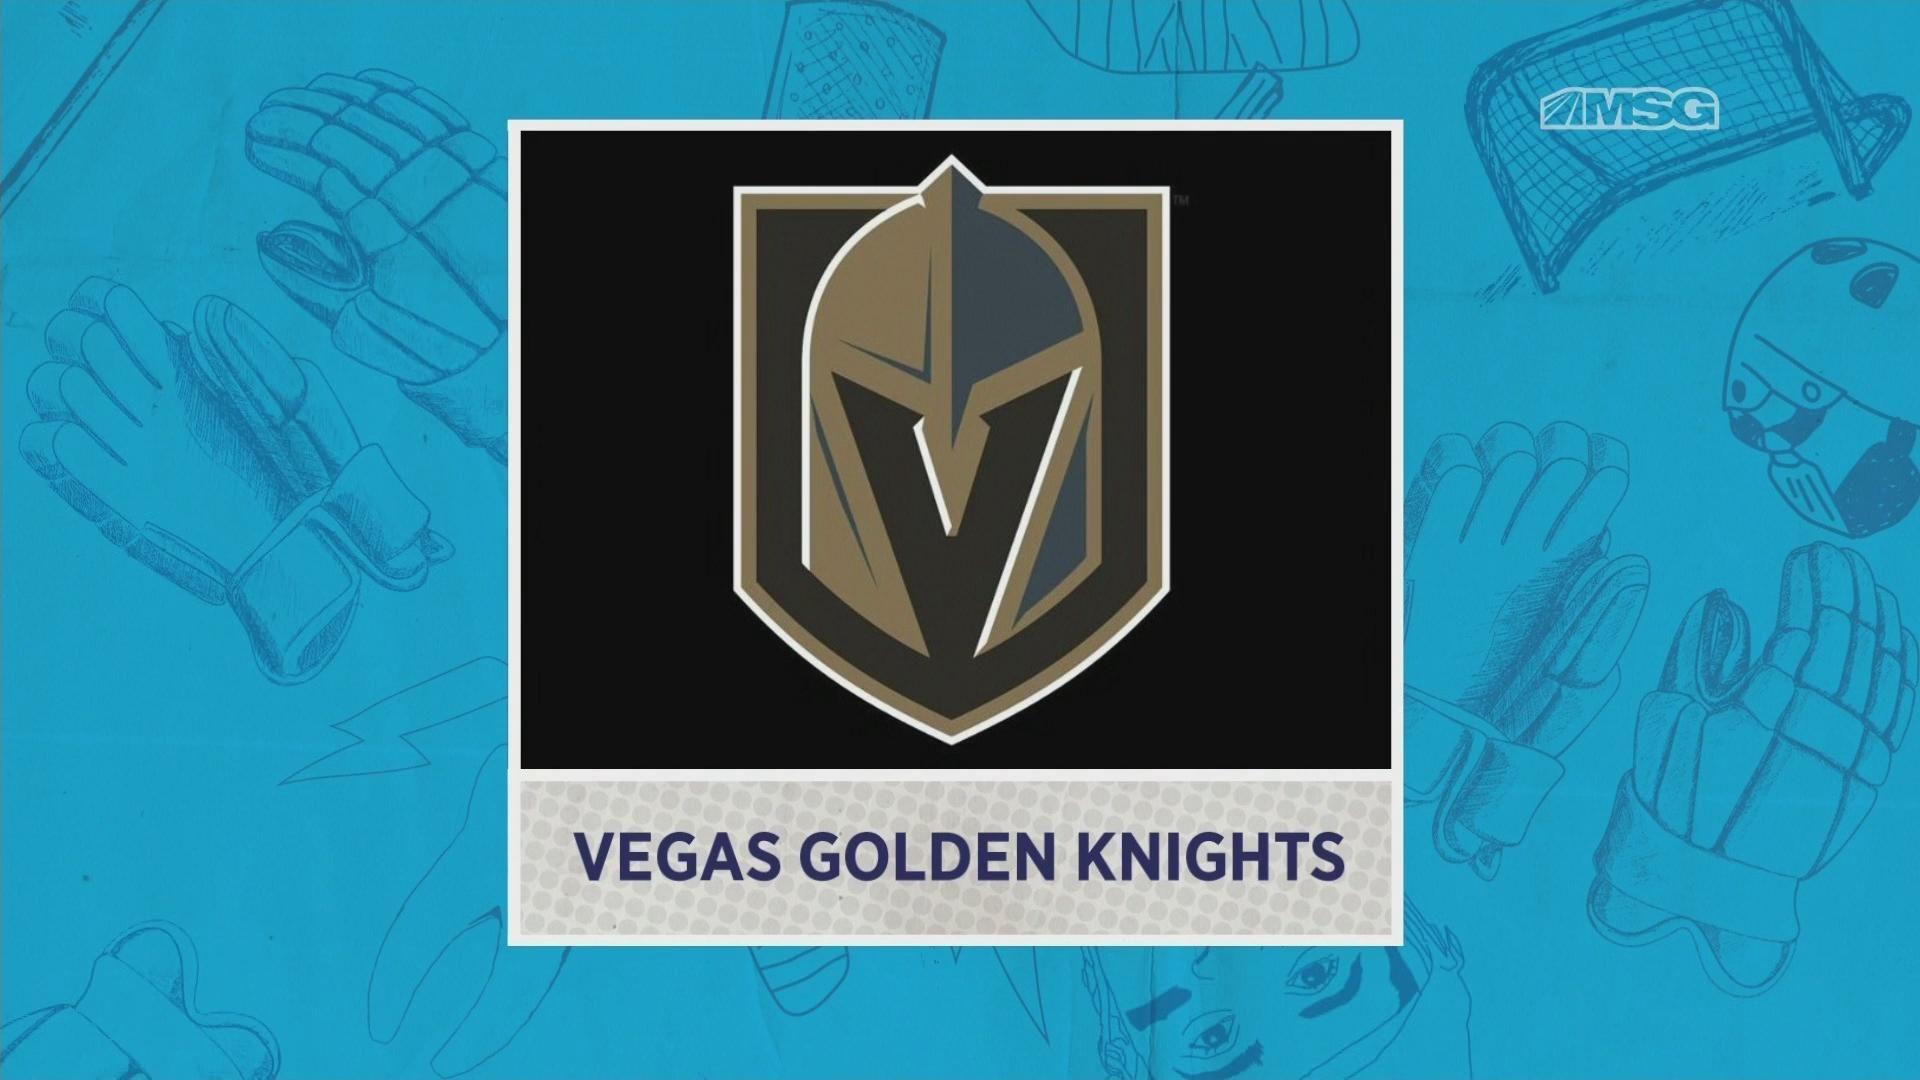 Buying or Selling the “Vegas Golden Knights”?